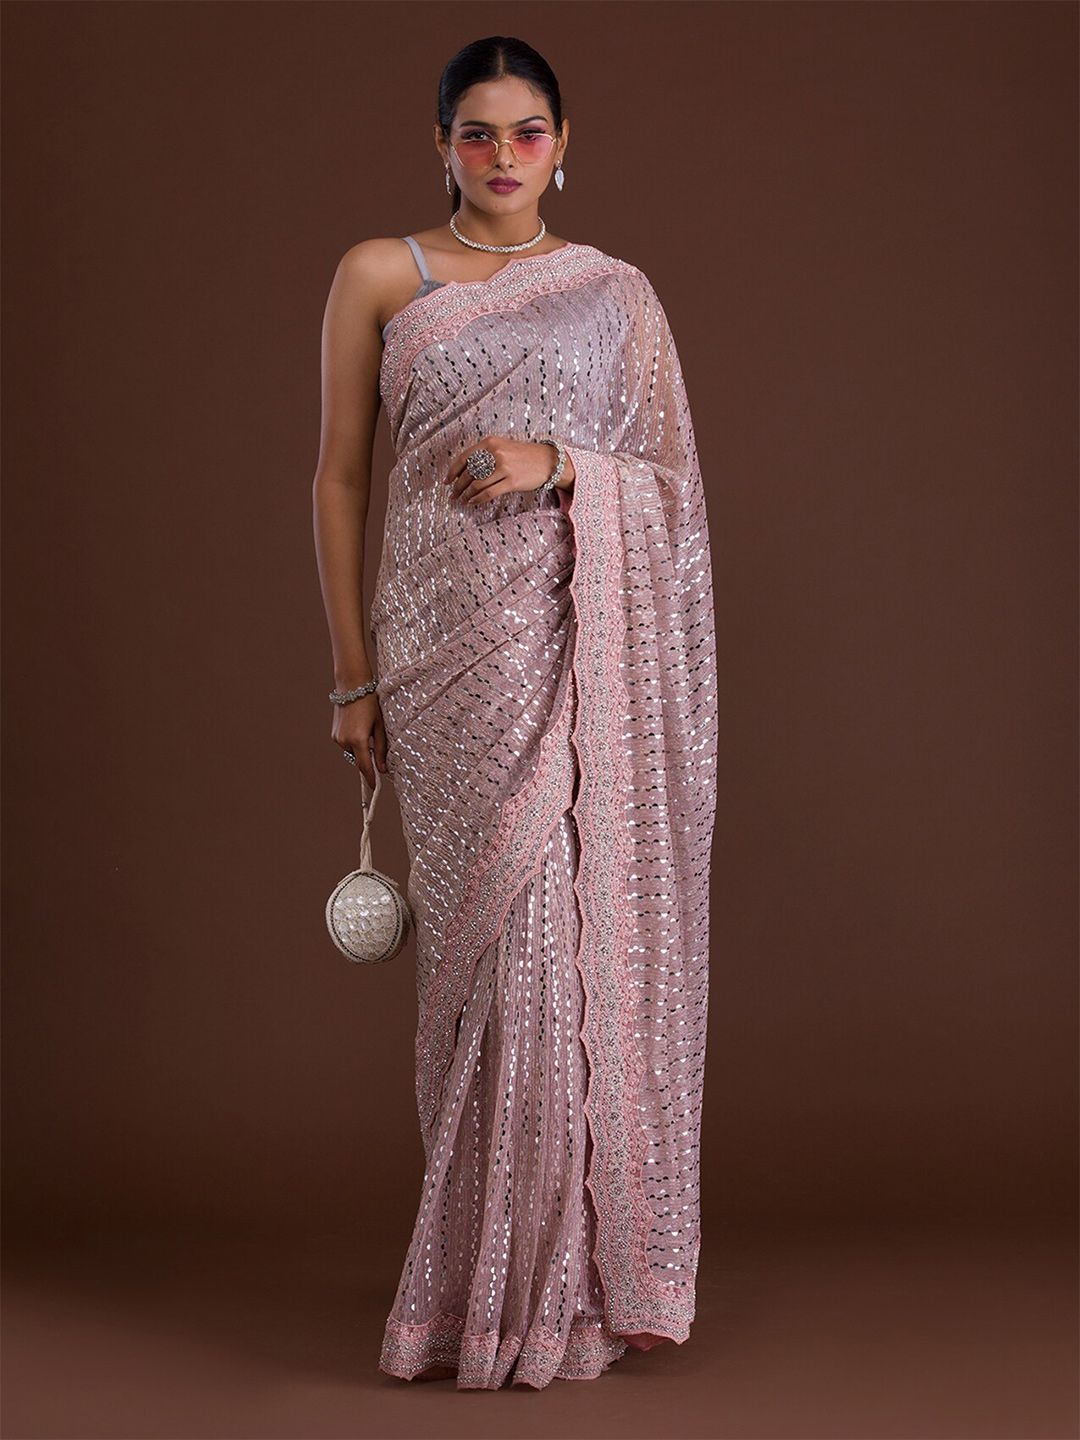 Koskii Peach-Coloured & Silver-Toned Embellished Mirror Work Supernet Saree Price in India